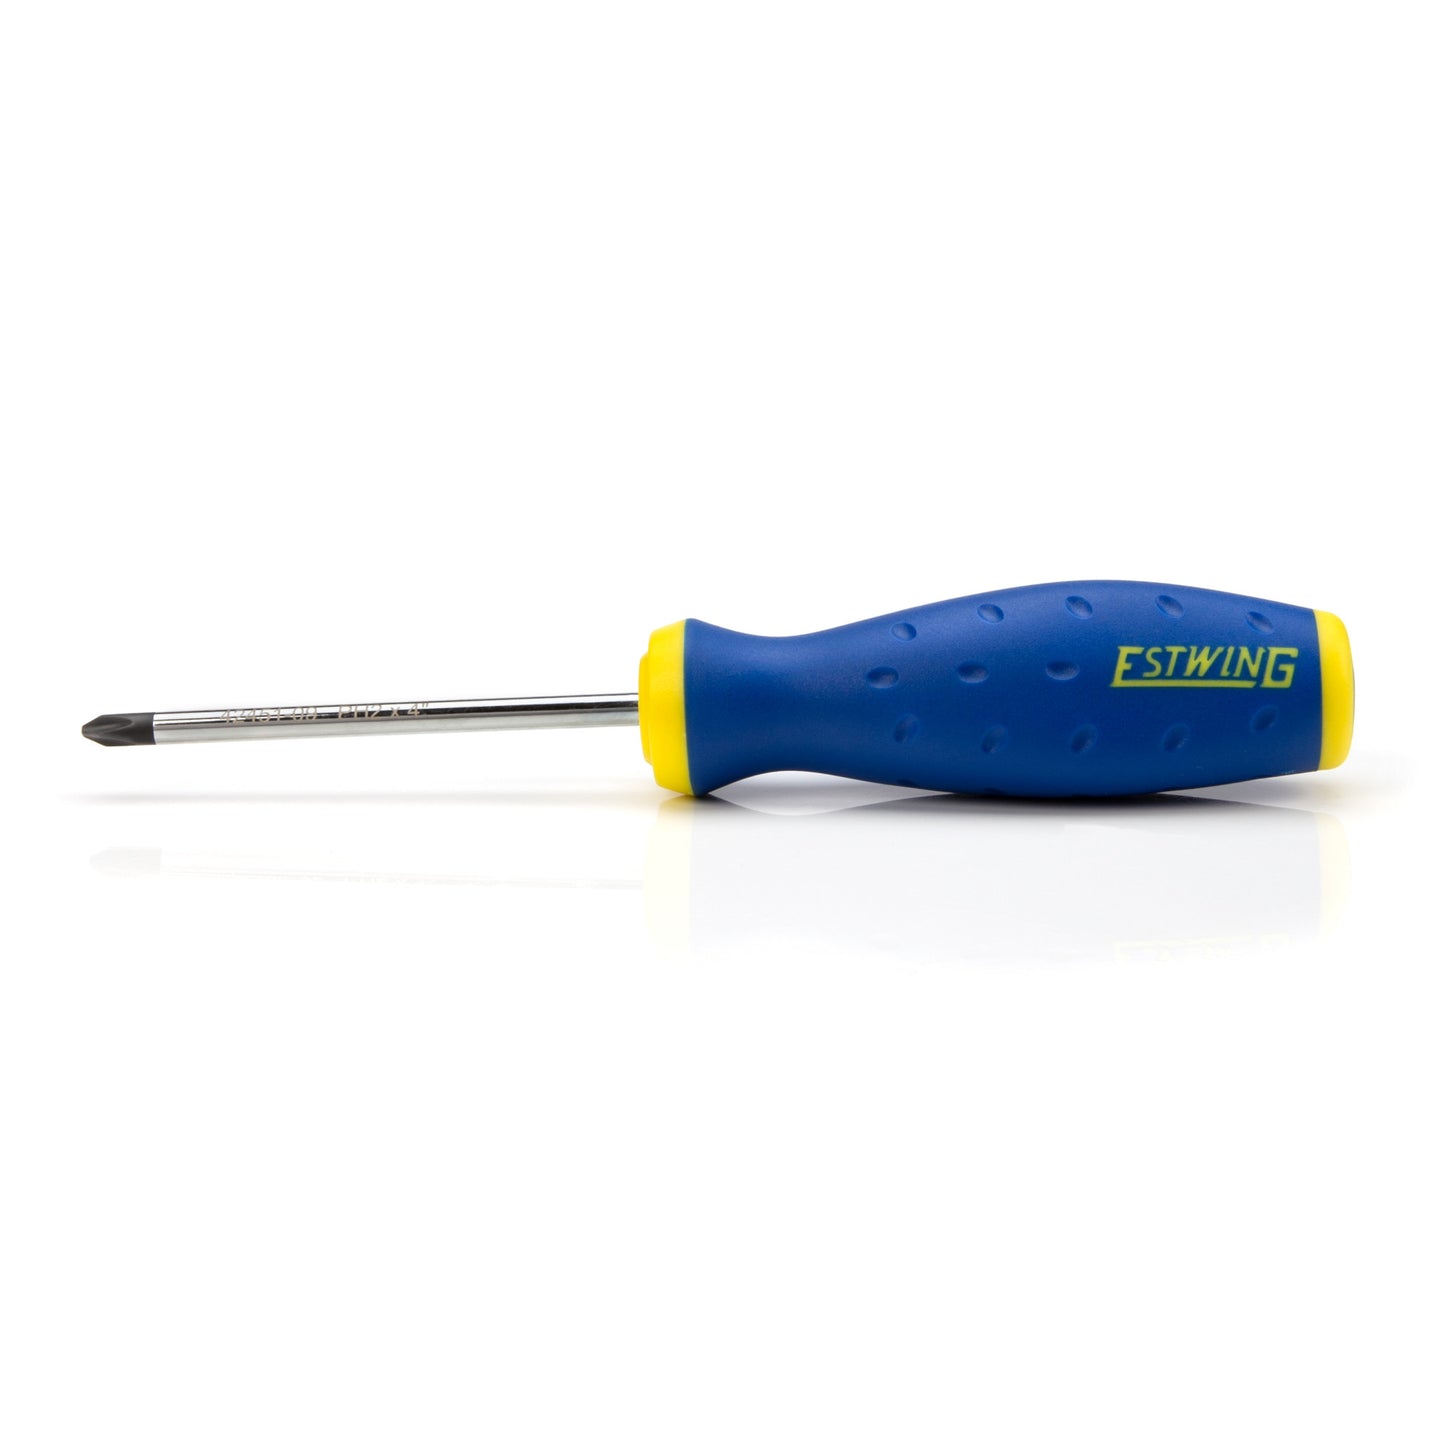 PH2 x 4-Inch Magnetic Philips Tip Screwdriver with Ergonomic Handle